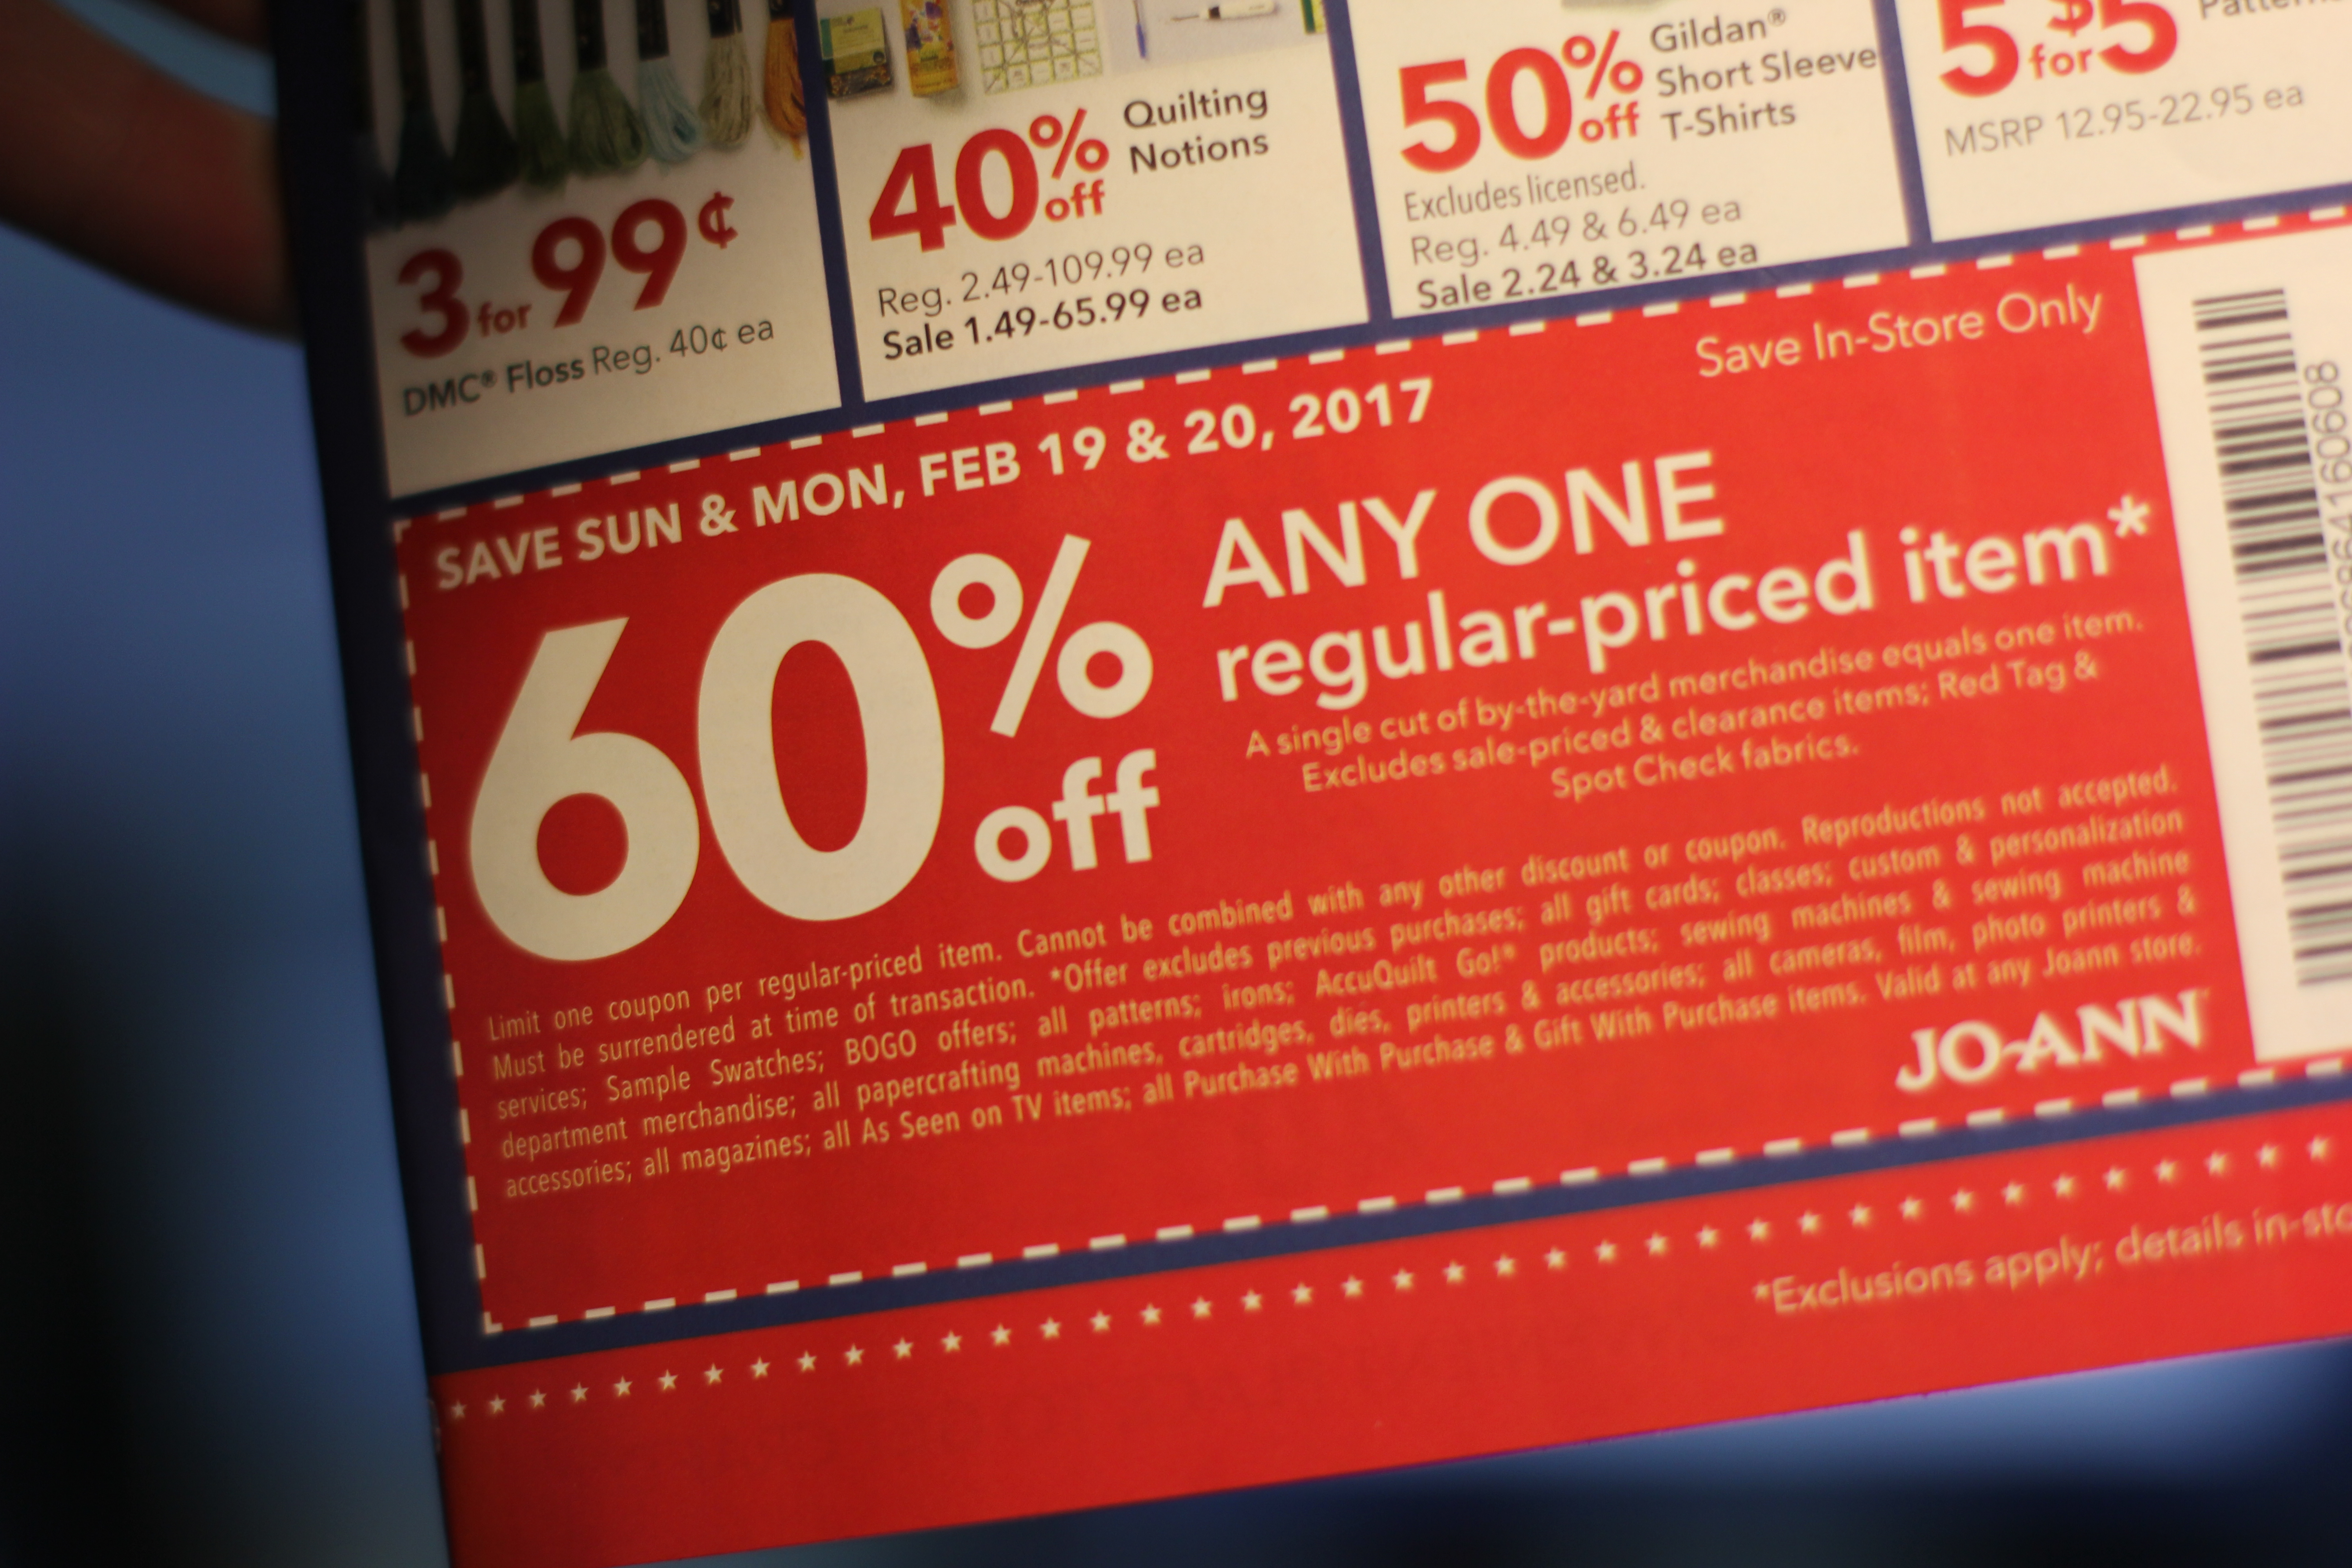 joann coupon guide getting more savings discounts 60 off coupon www